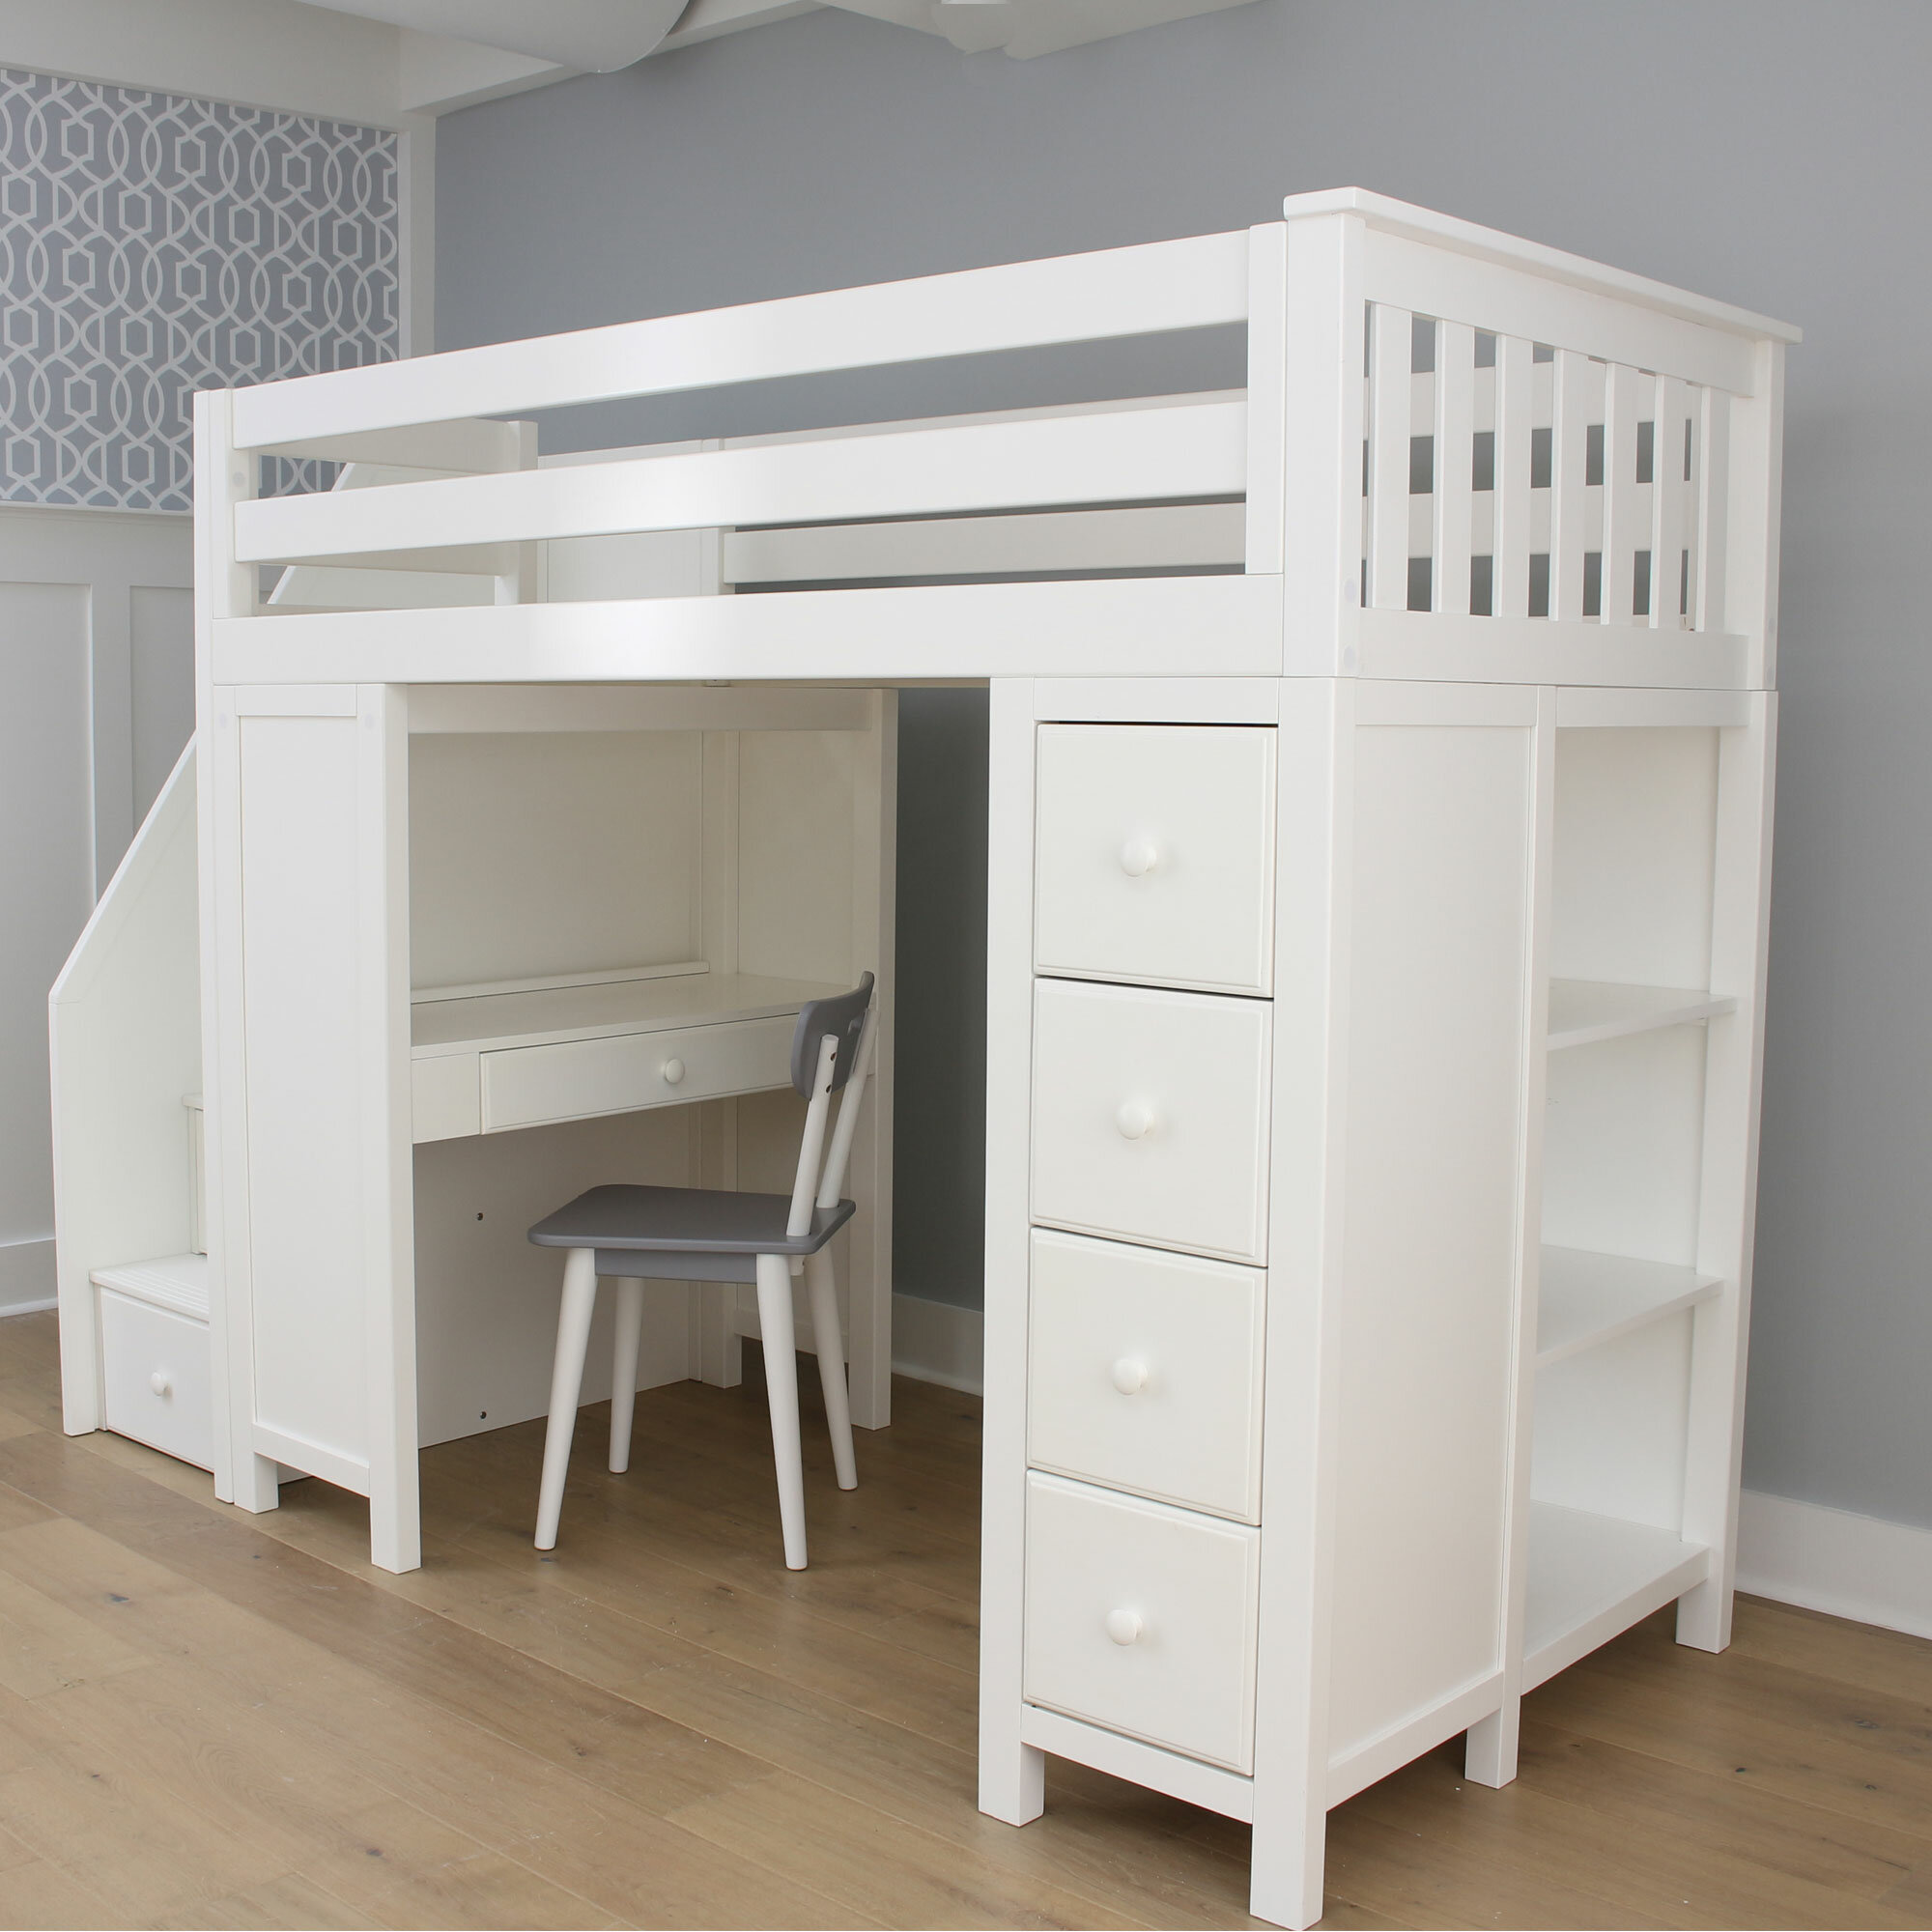 crib and bunk bed combo